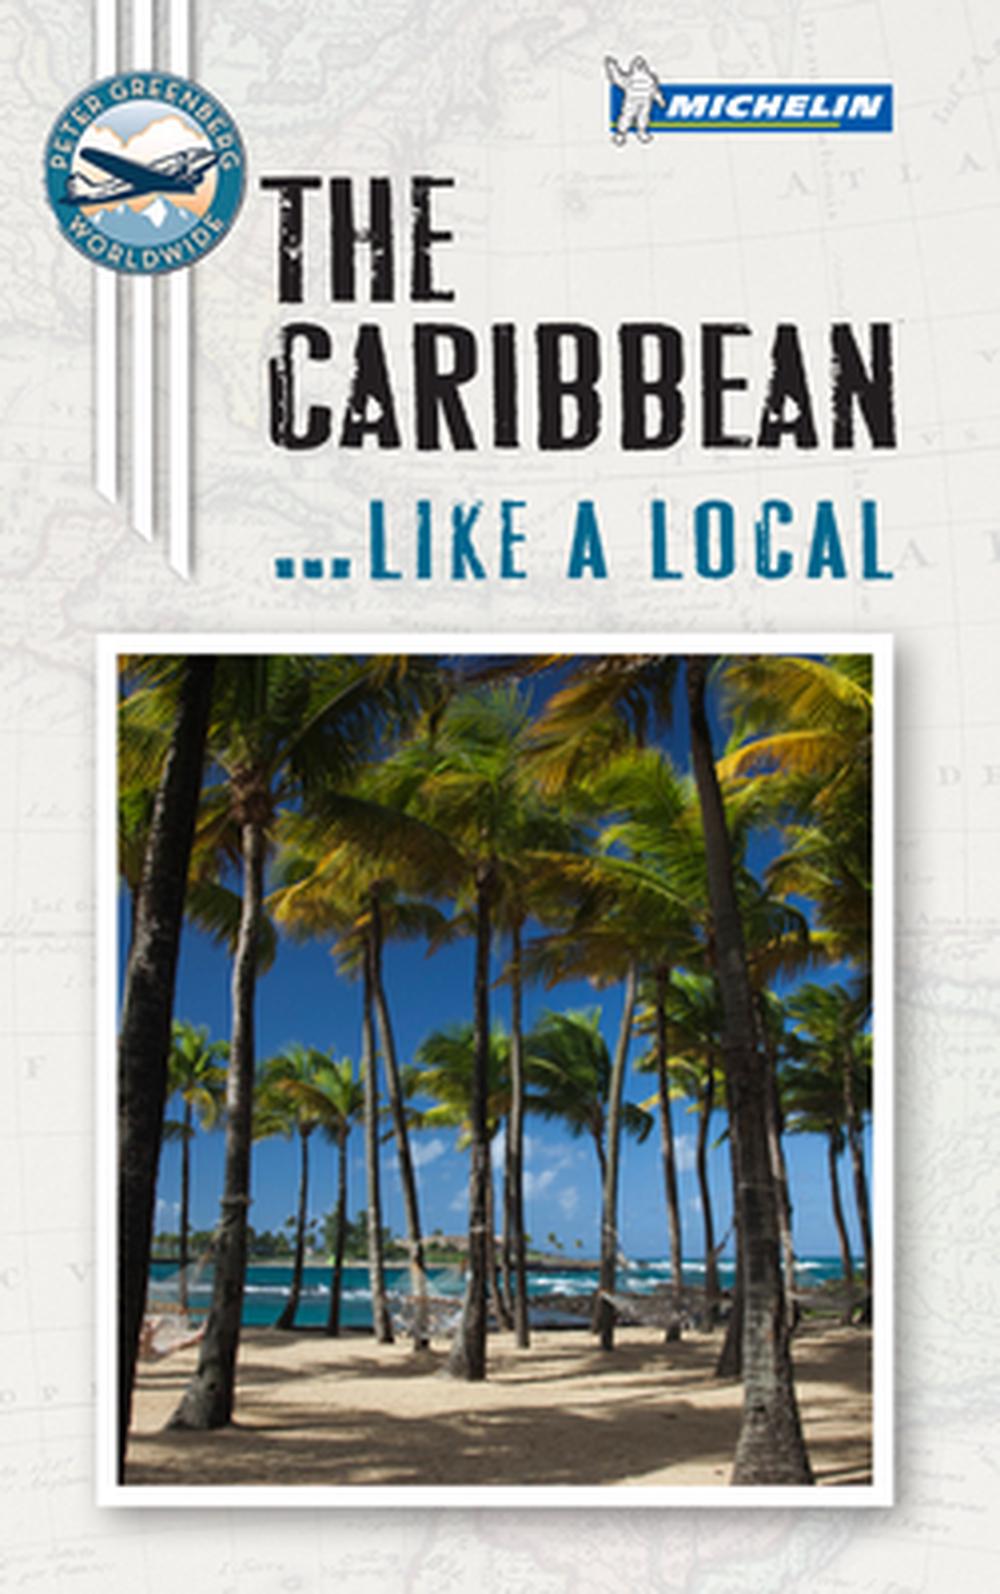 Caribbean Like a Local by Michelin Travel & Lifestyle (English